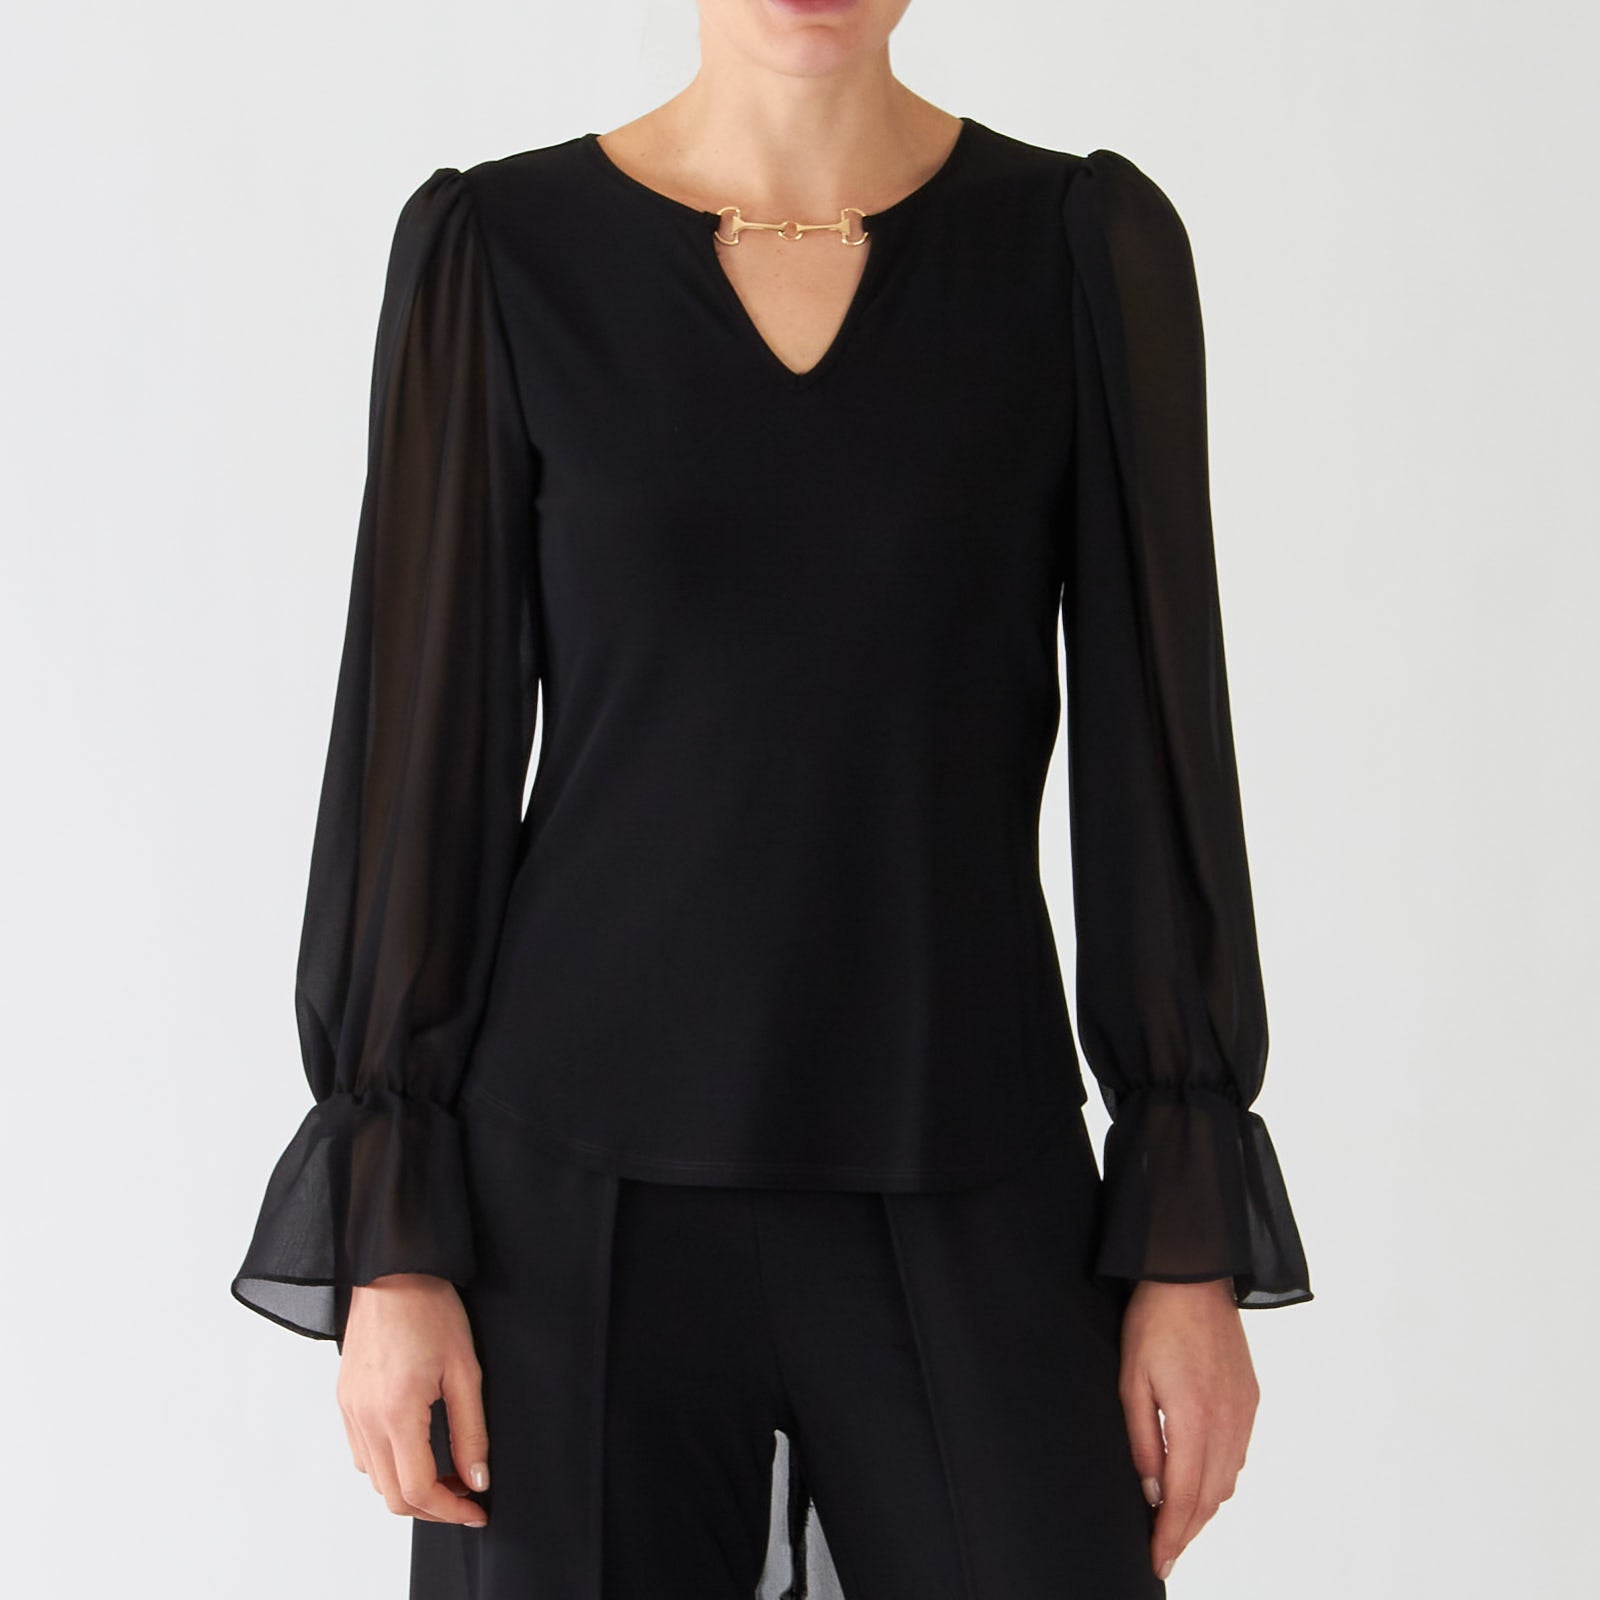 Black Keyhole Blouse With Gold Bar